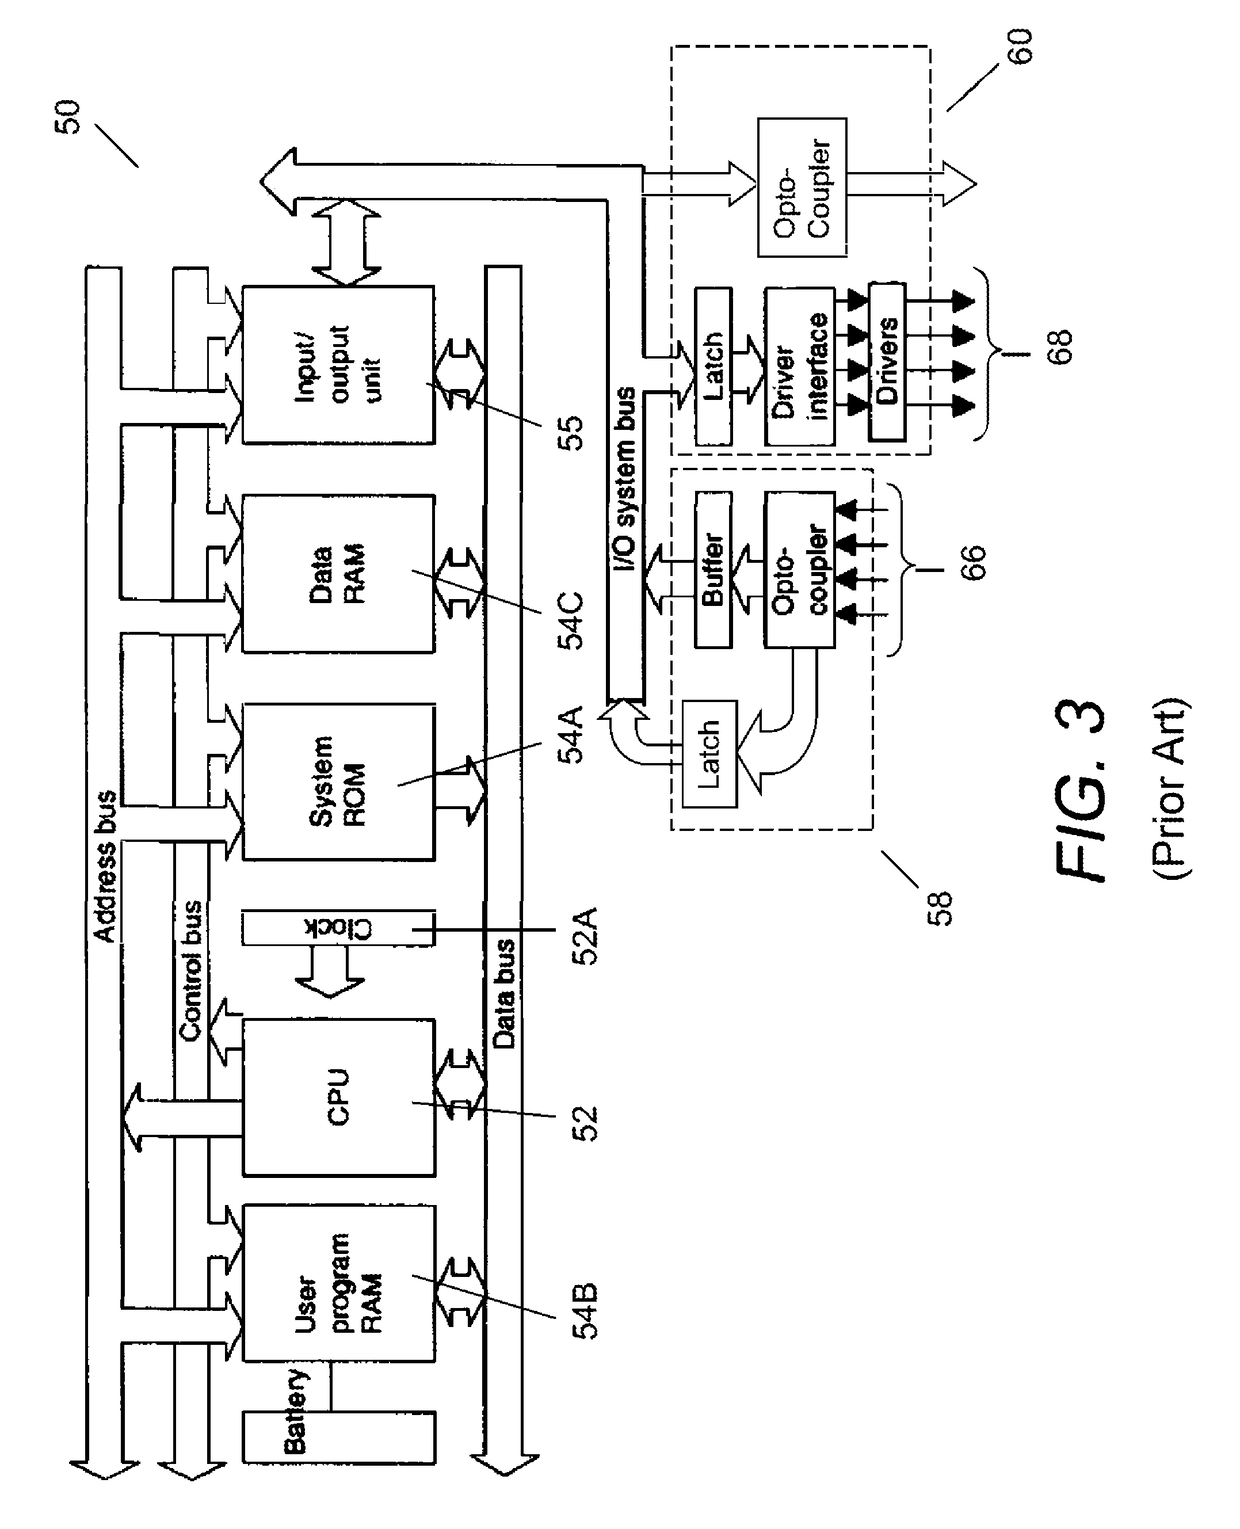 Methods, apparatus, and systems for monitoring and/or controlling dynamic environments